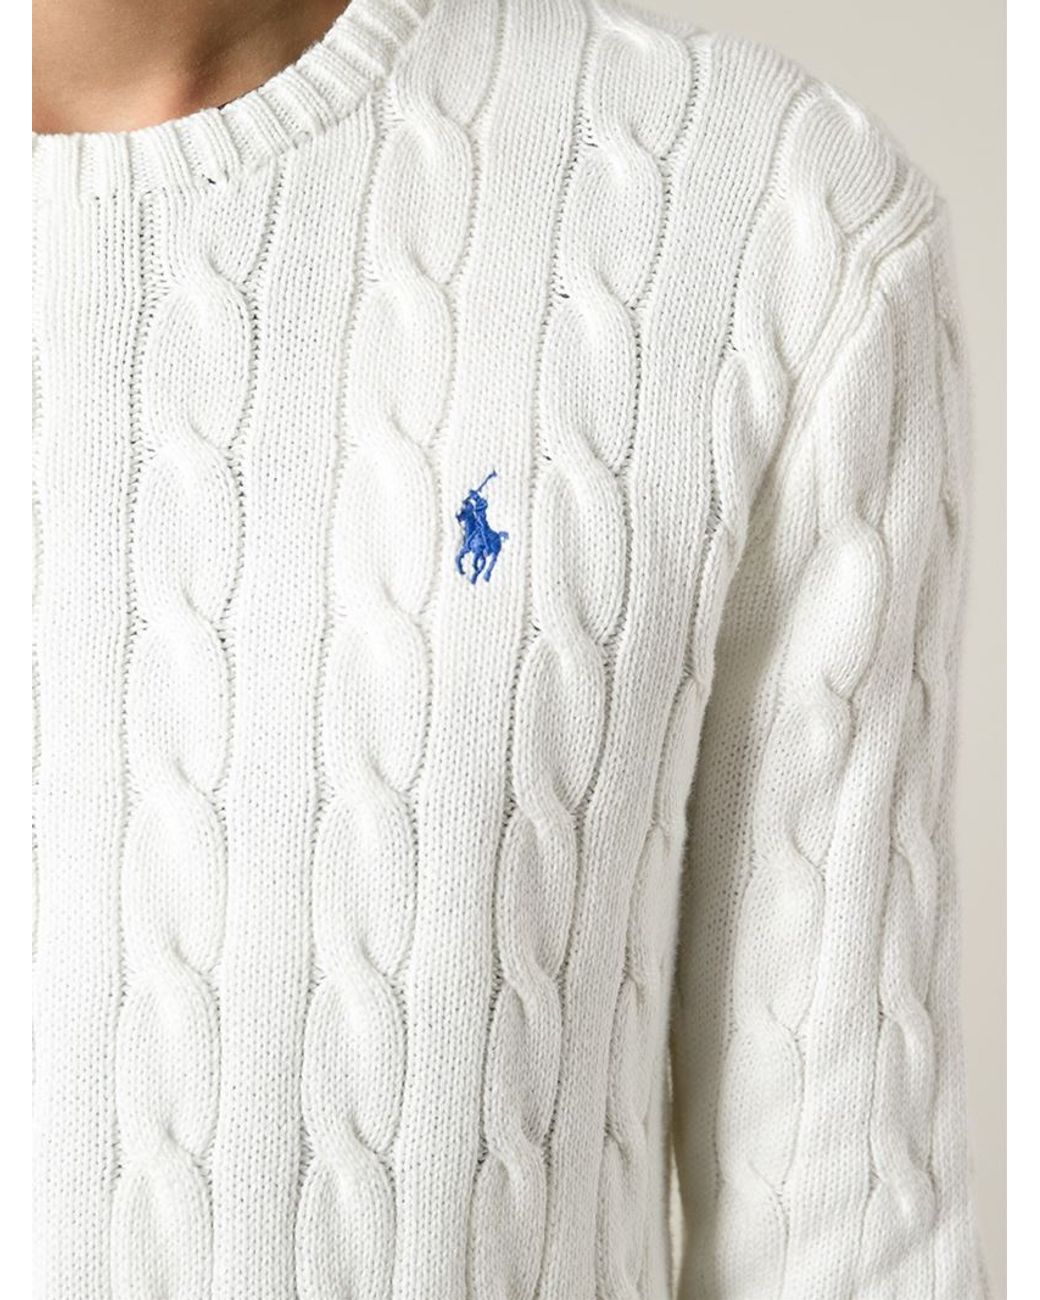 Polo Ralph Lauren Cable Knit Sweater in White for Men | Lyst